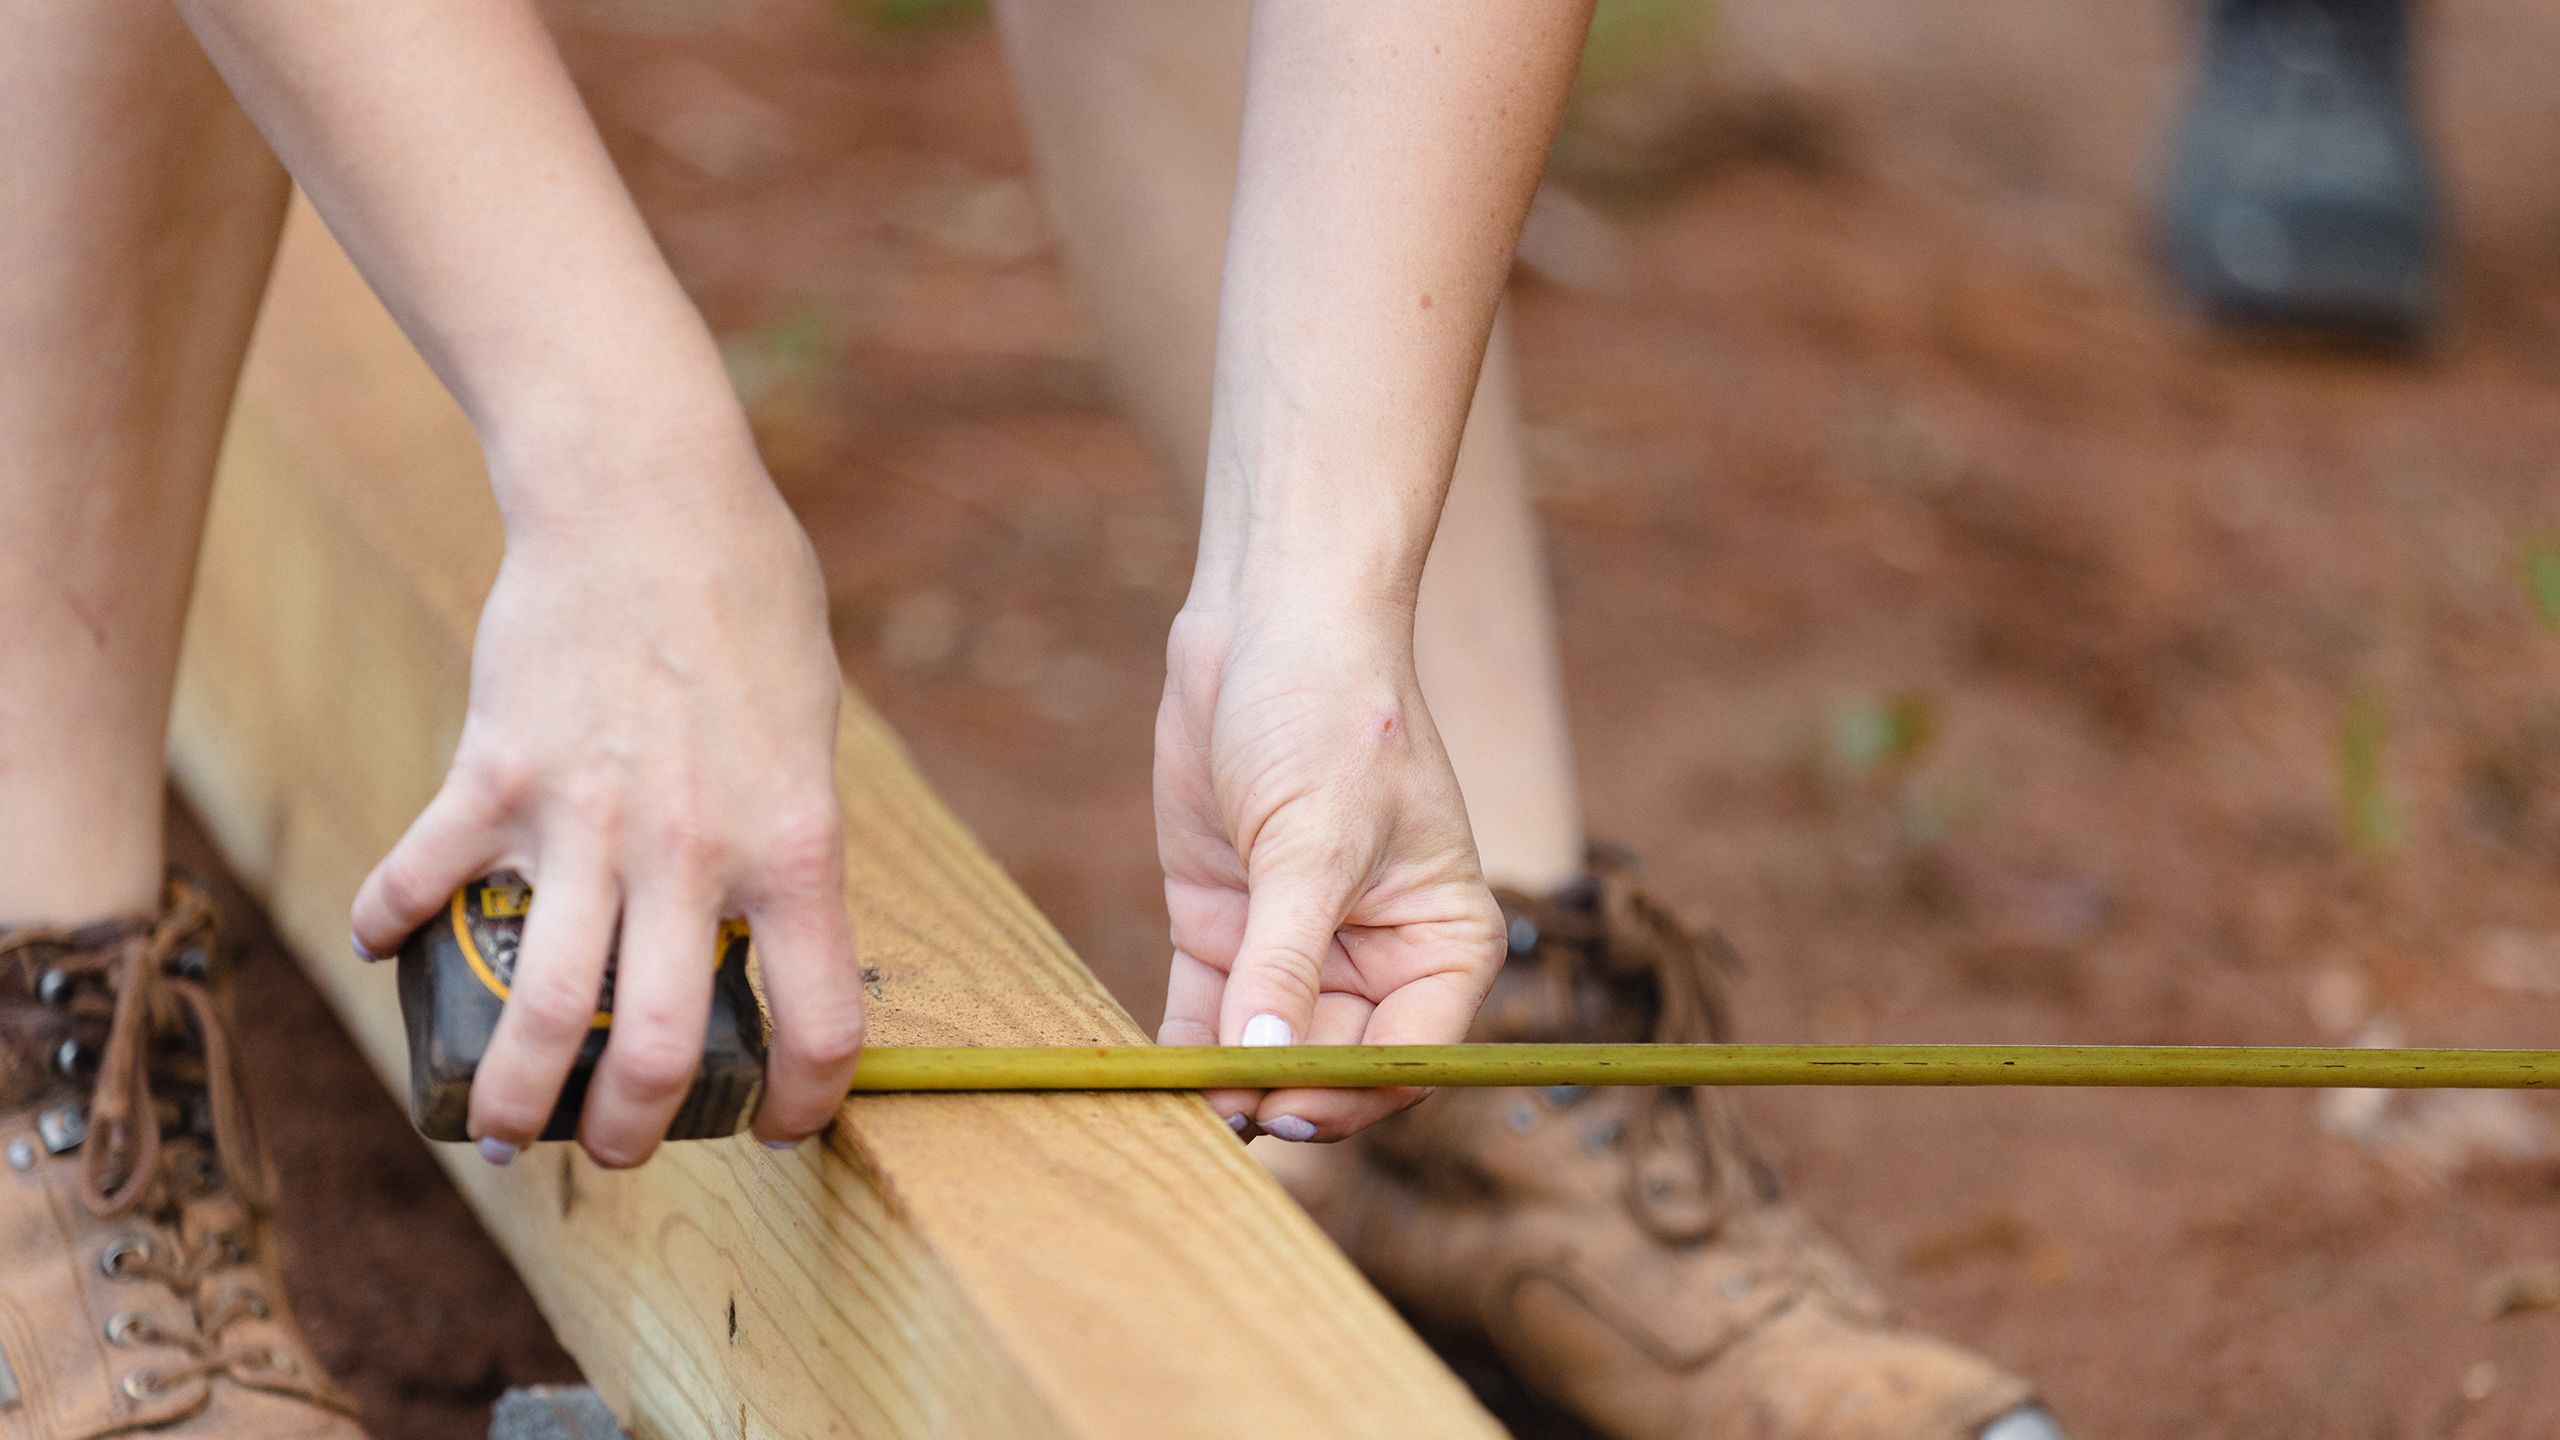 A volunteer measures and marks a wood plank.